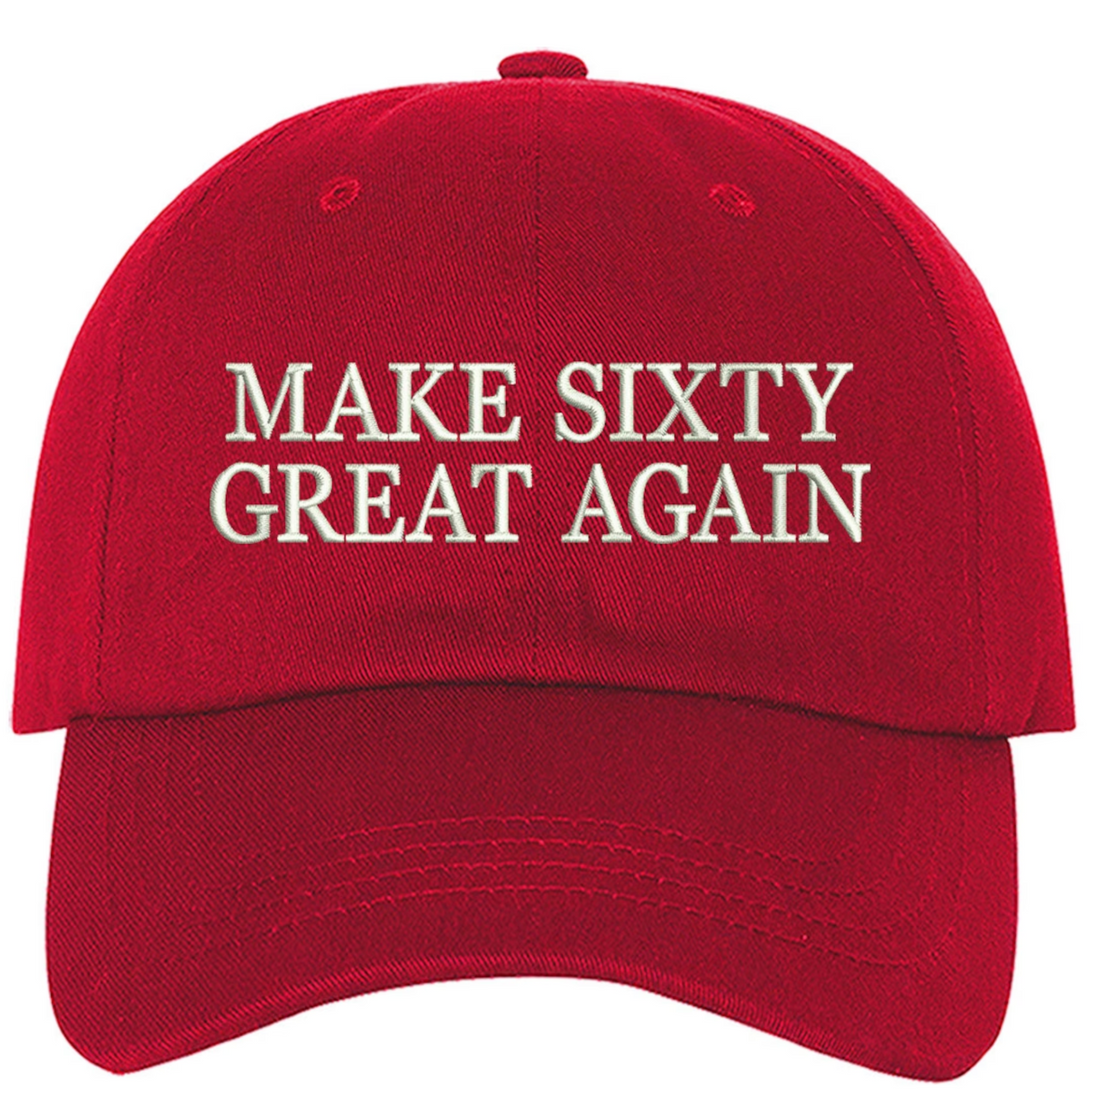 Red baseball hat embroidered with Make sixty great again - DSY Lifestyle